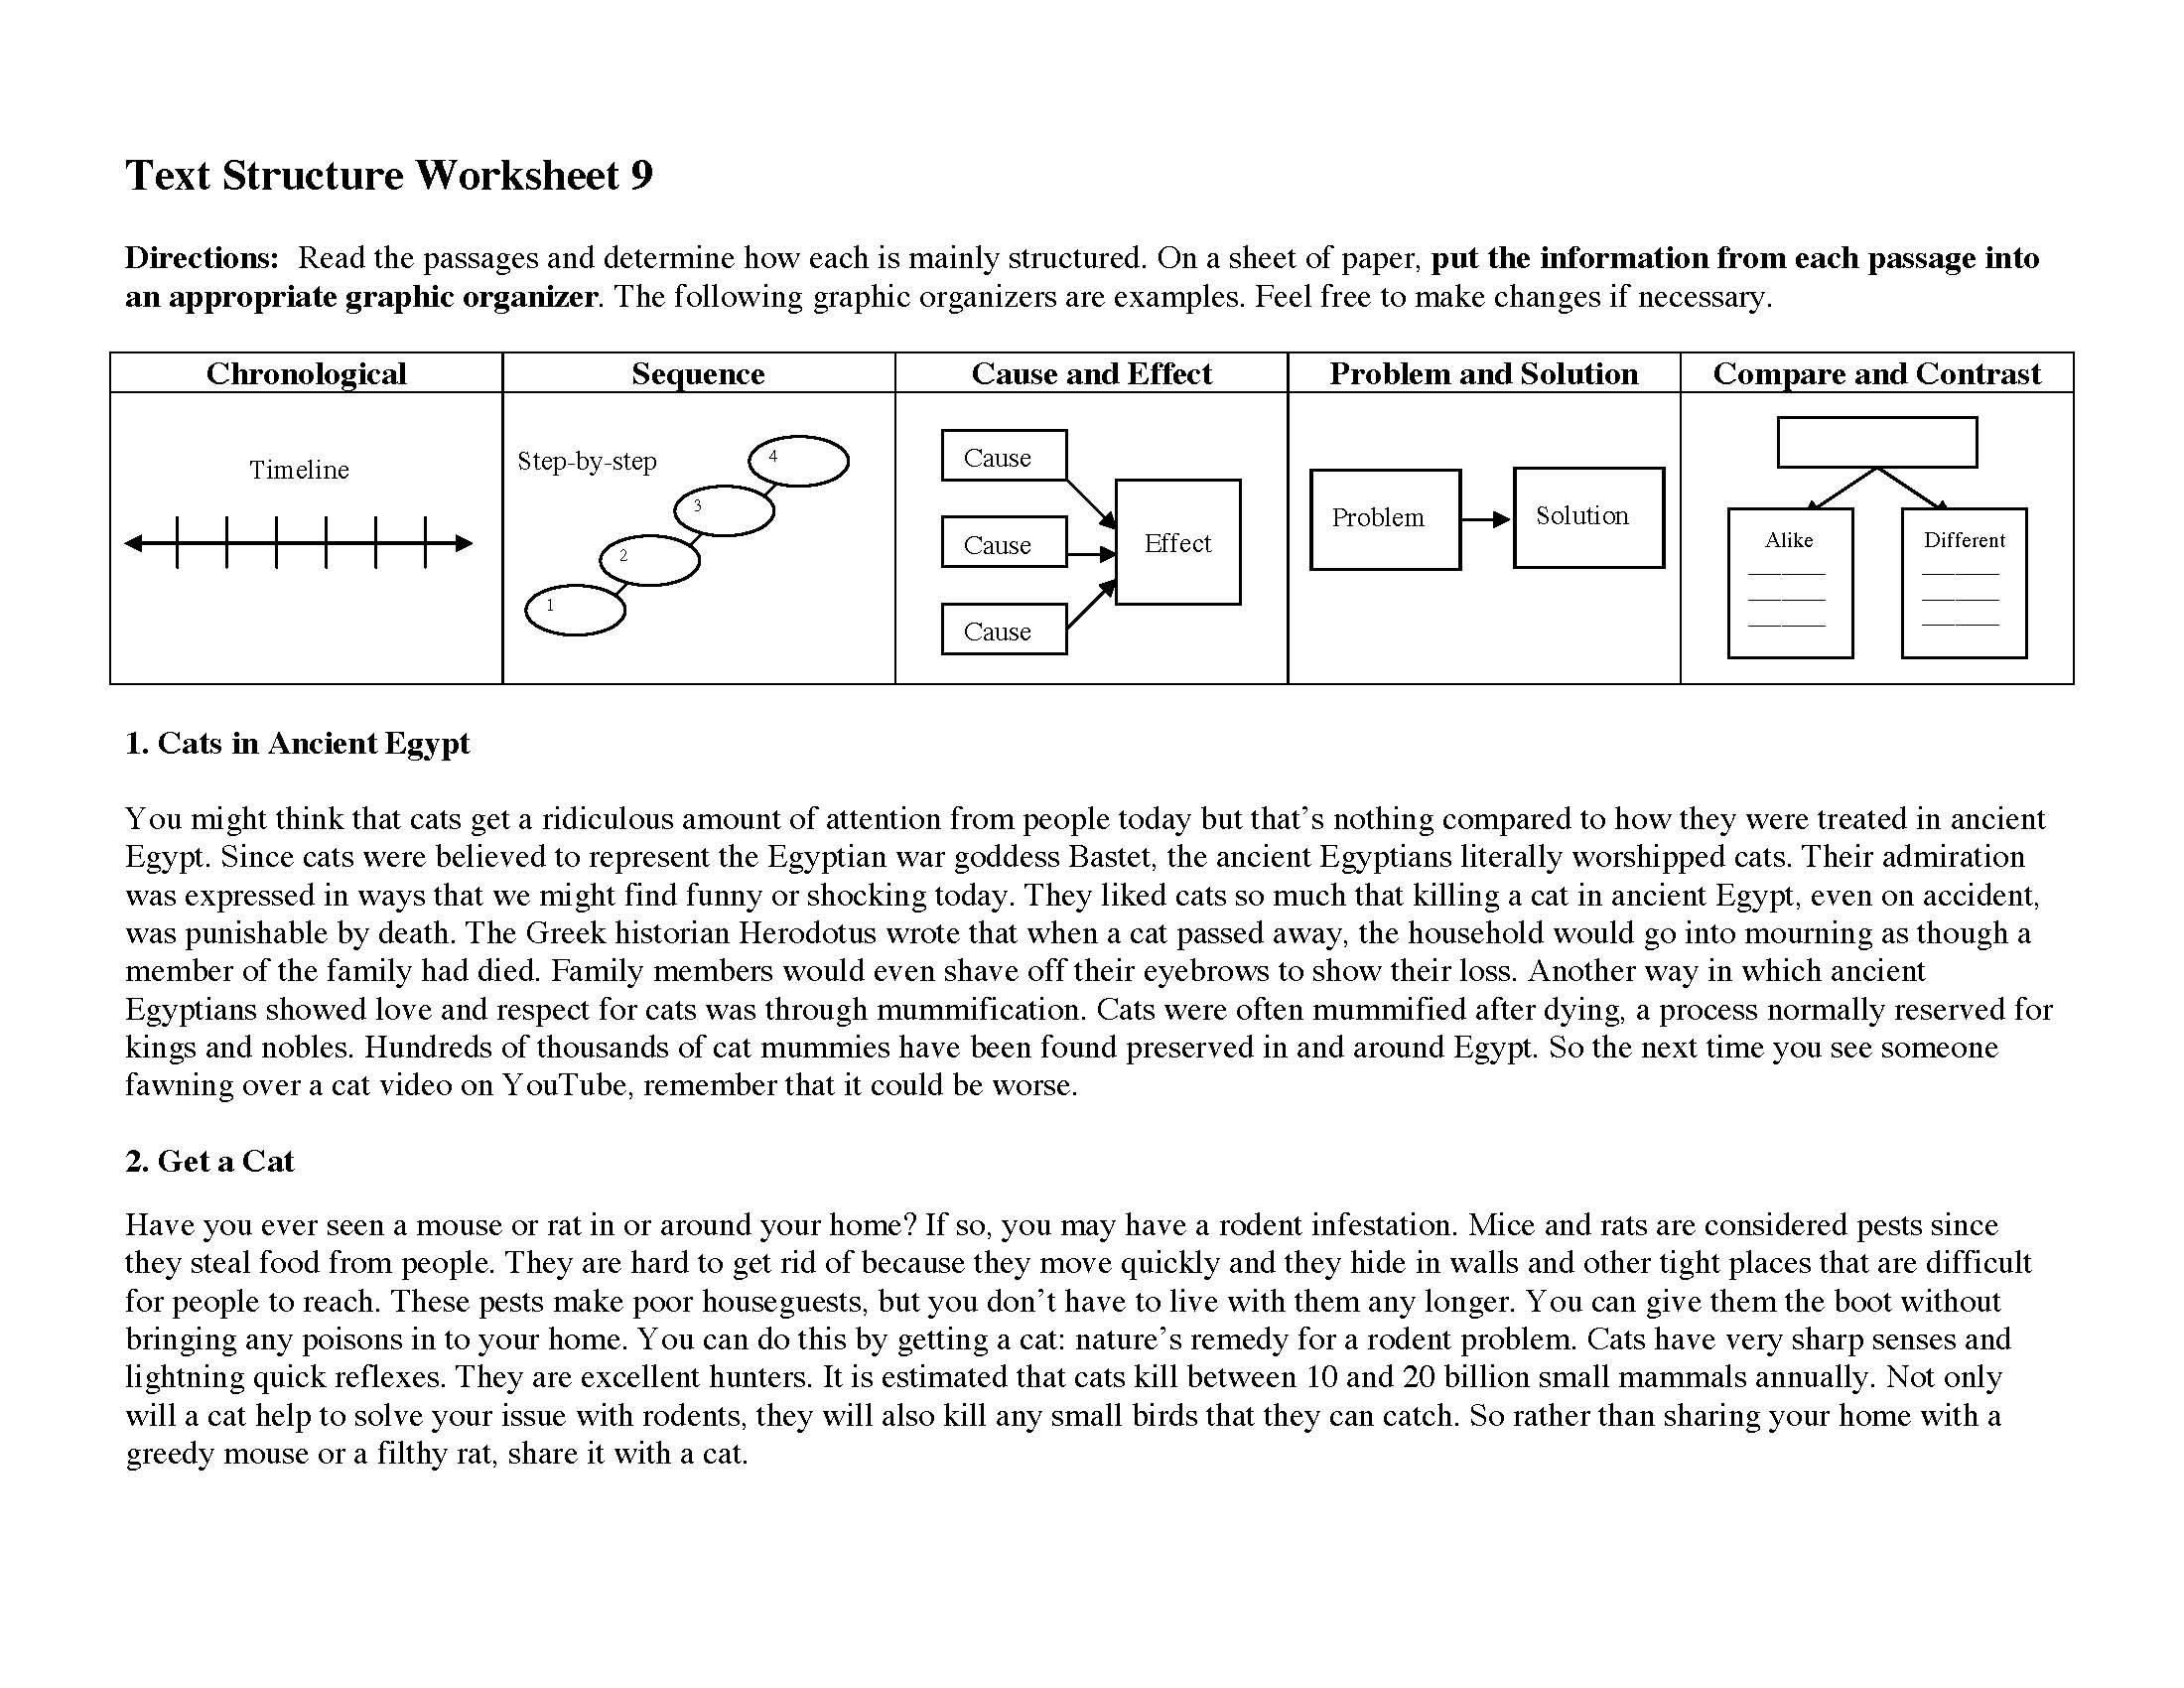 This is a preview image of the Text Structure Worksheet 9.